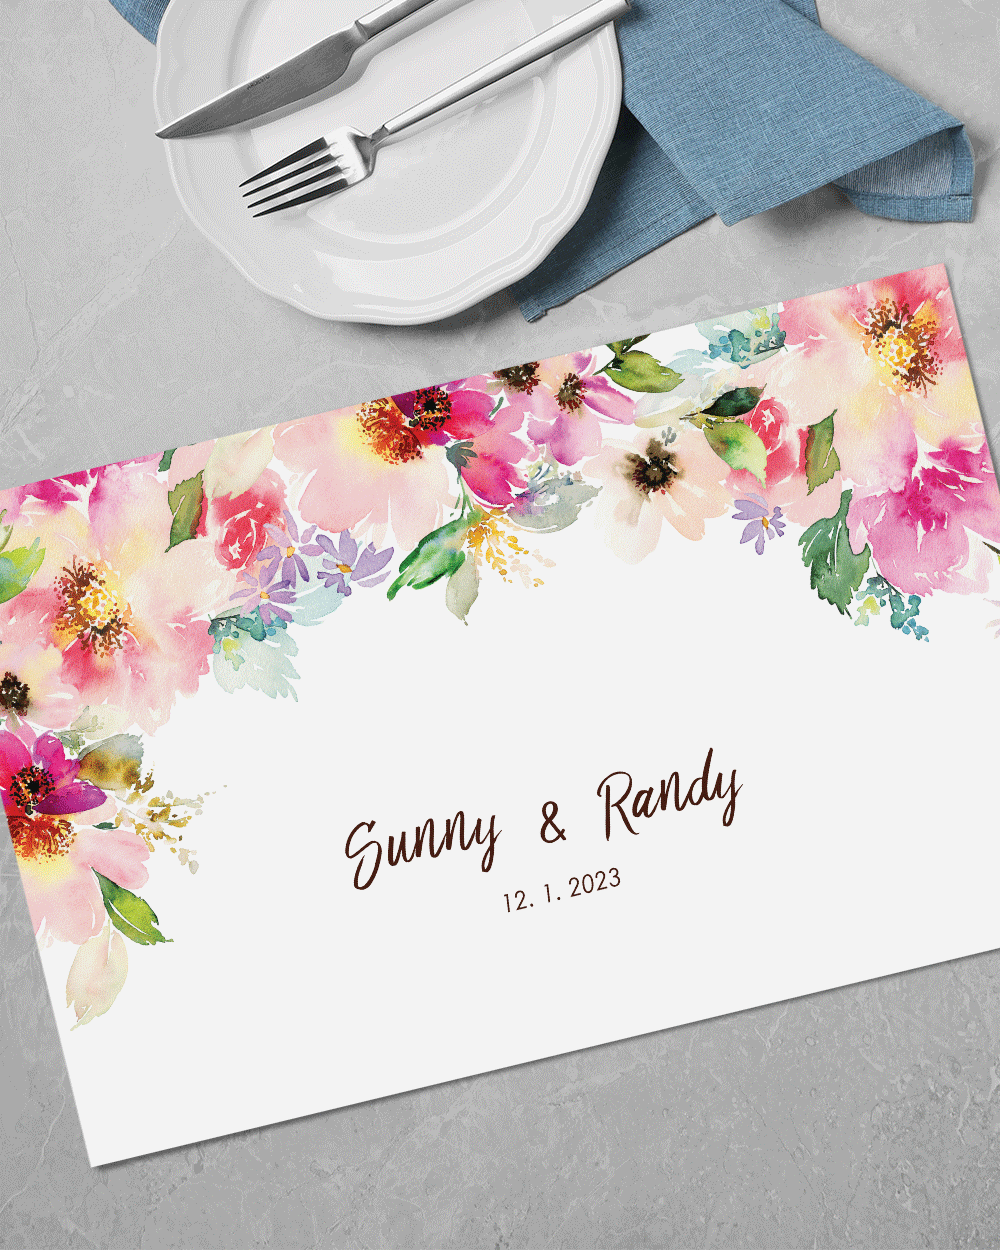 Sunny& Randy-17"x11" 50pcs, Disposable Place Baby Showers, Bridal Shower Table Setting Seasonal Party Kitchen Home Decor Dining